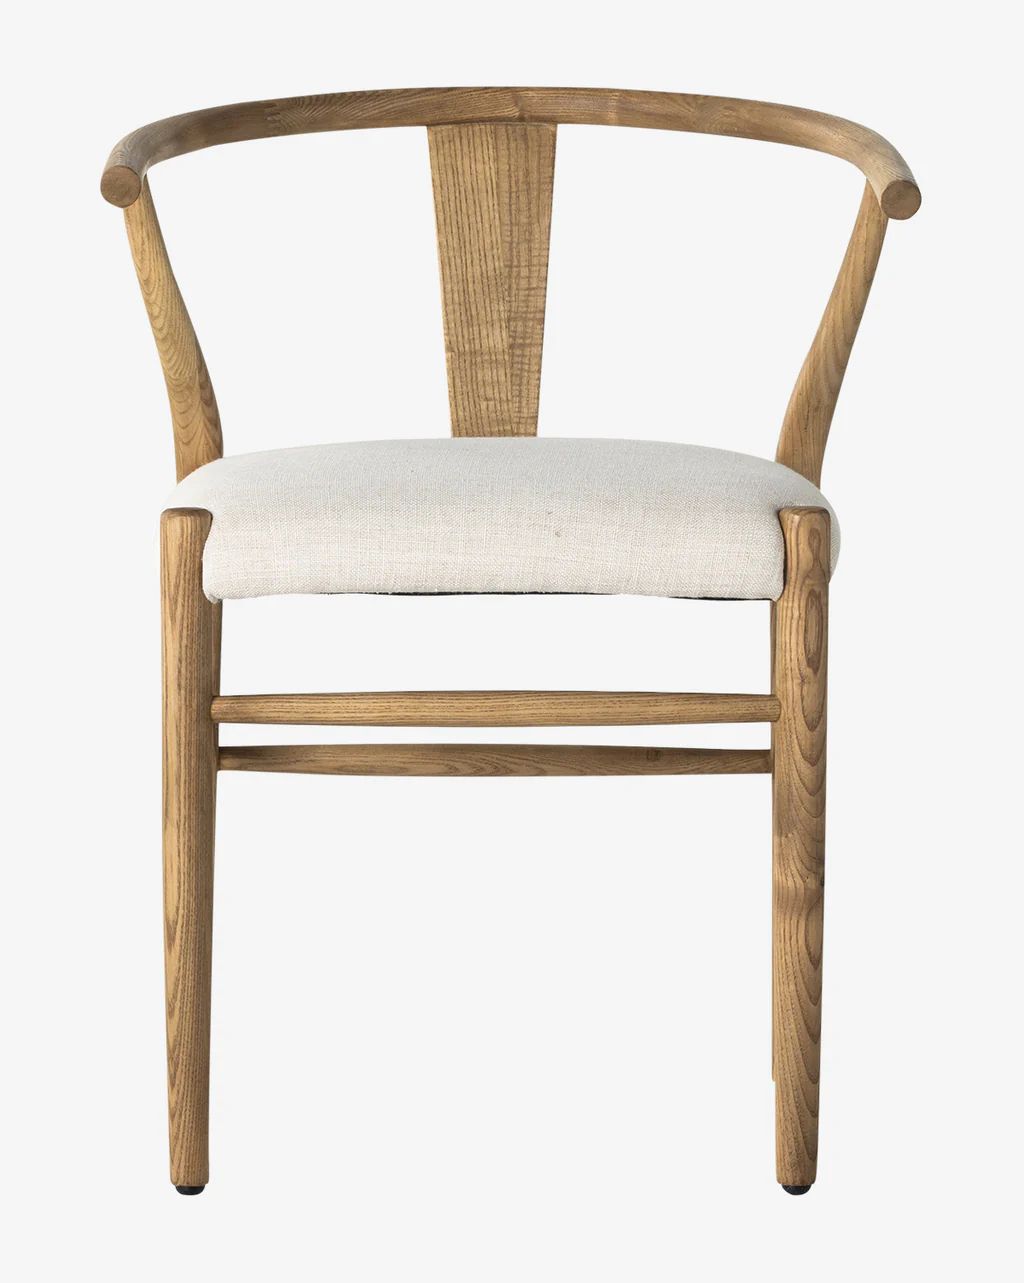 Hatty Dining Chair | McGee & Co.